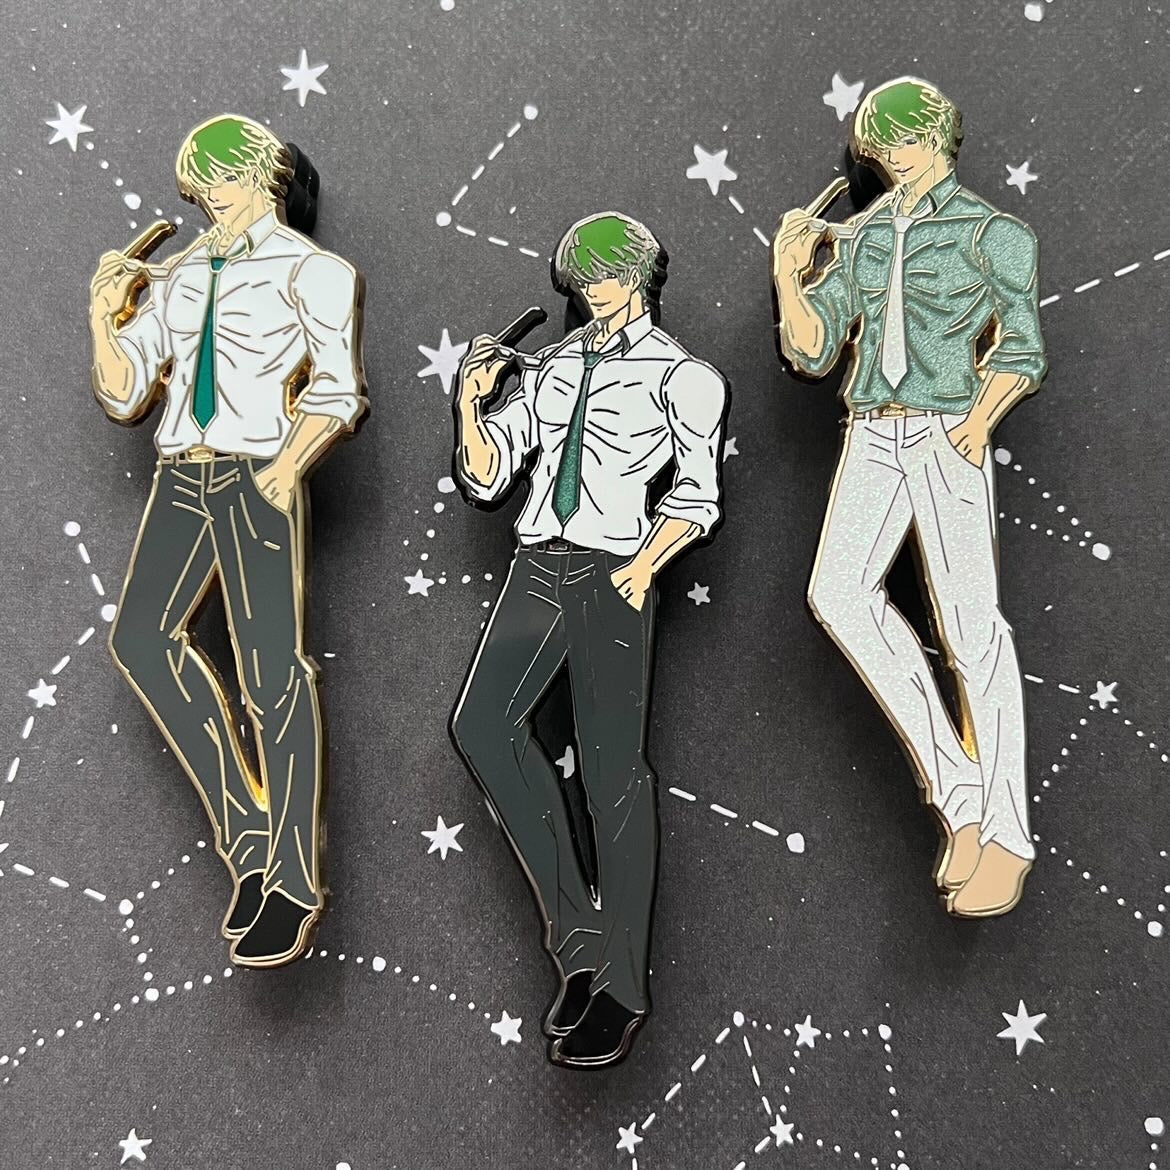 KnB Suits